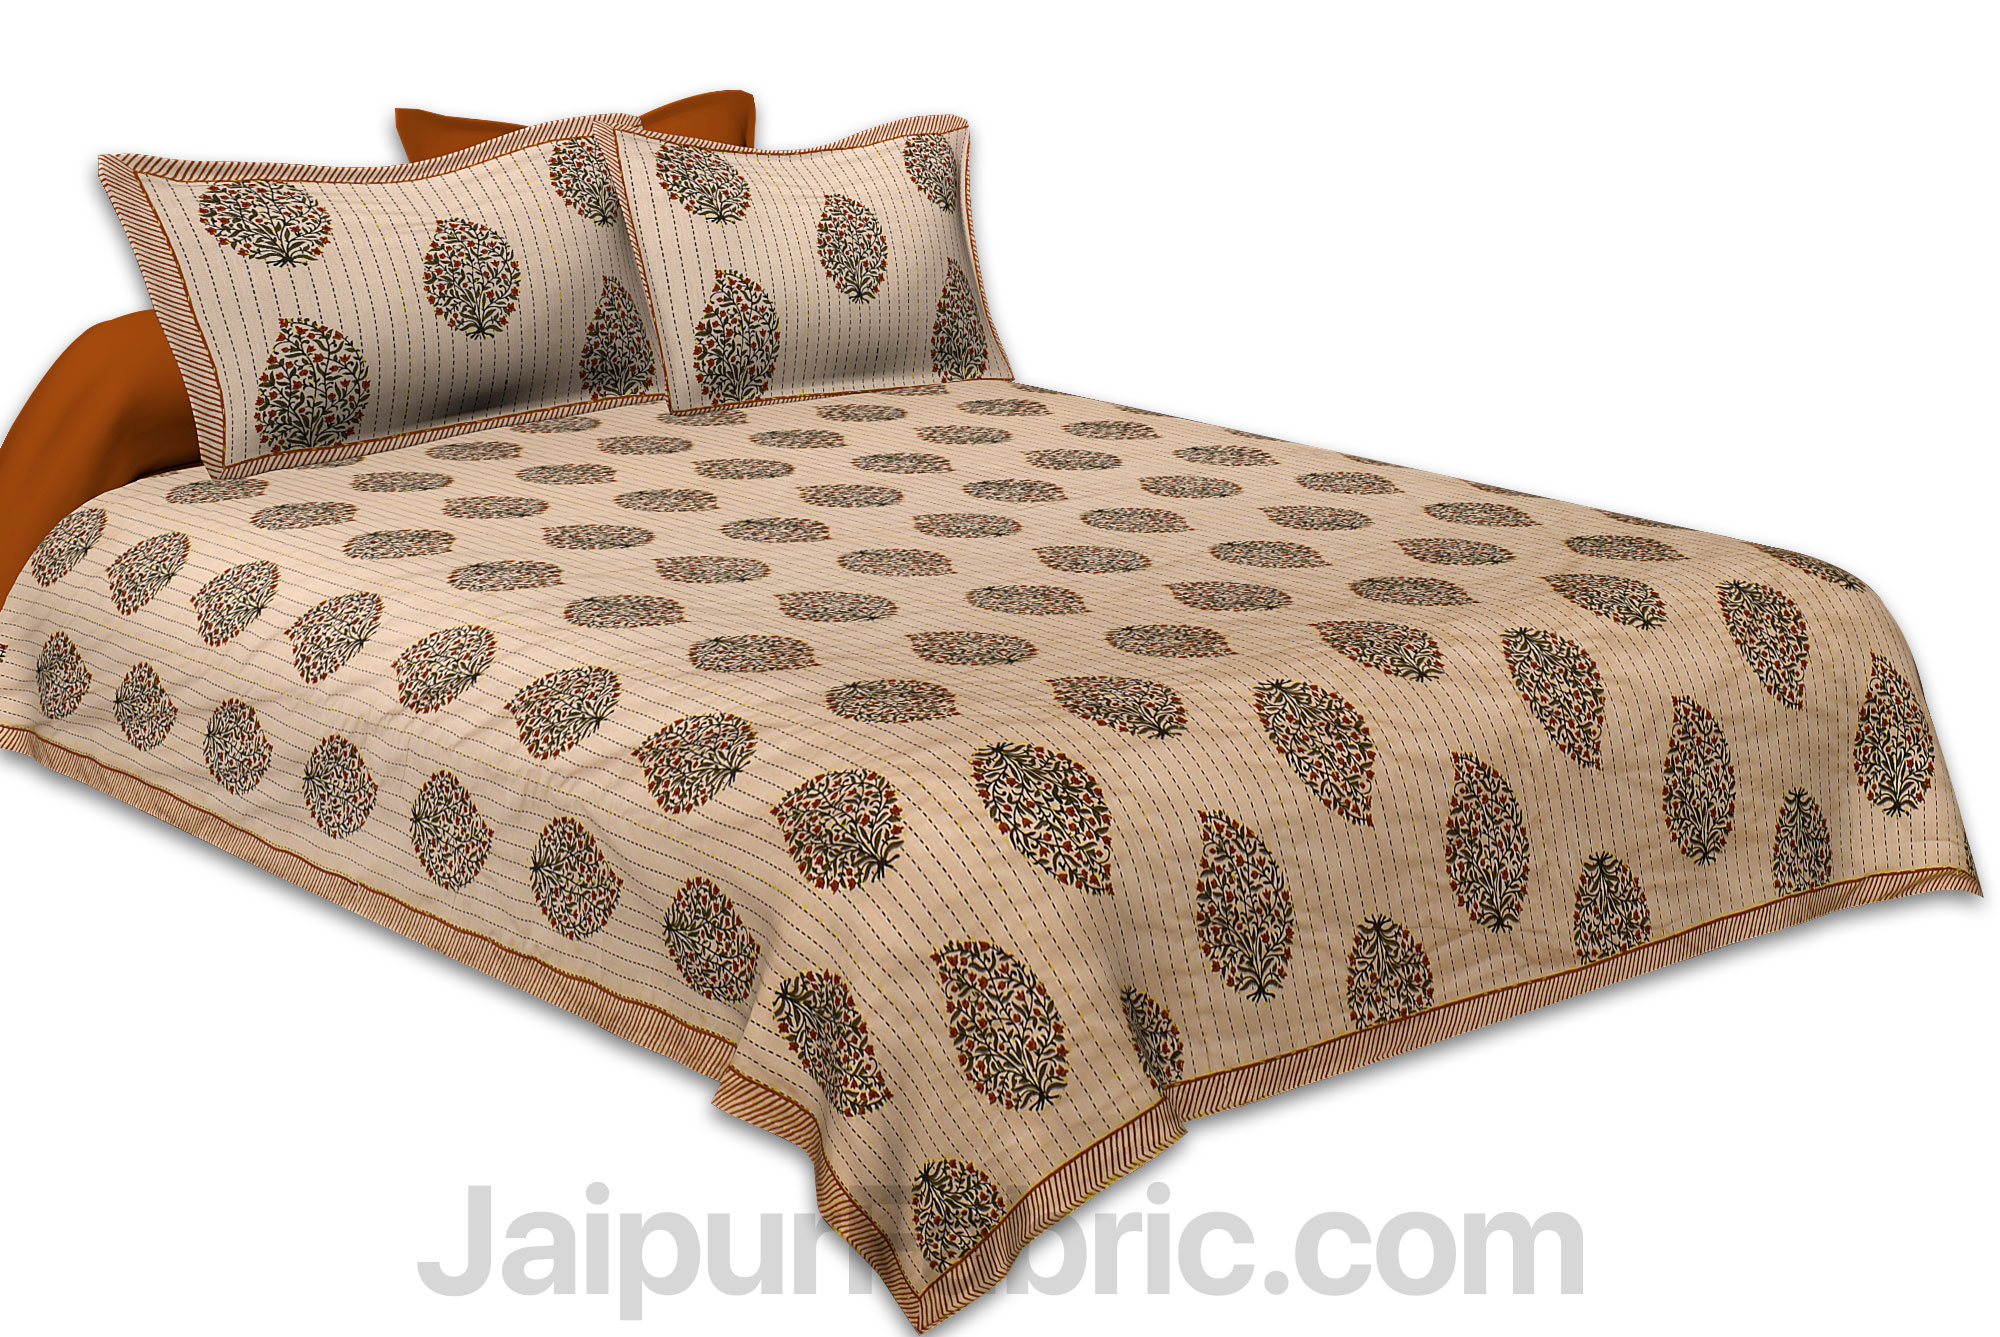 Floral Paisley Kantha Thread Work Embroidery Double Bedsheet / Dohar / Light Blanket / Thin Comforter